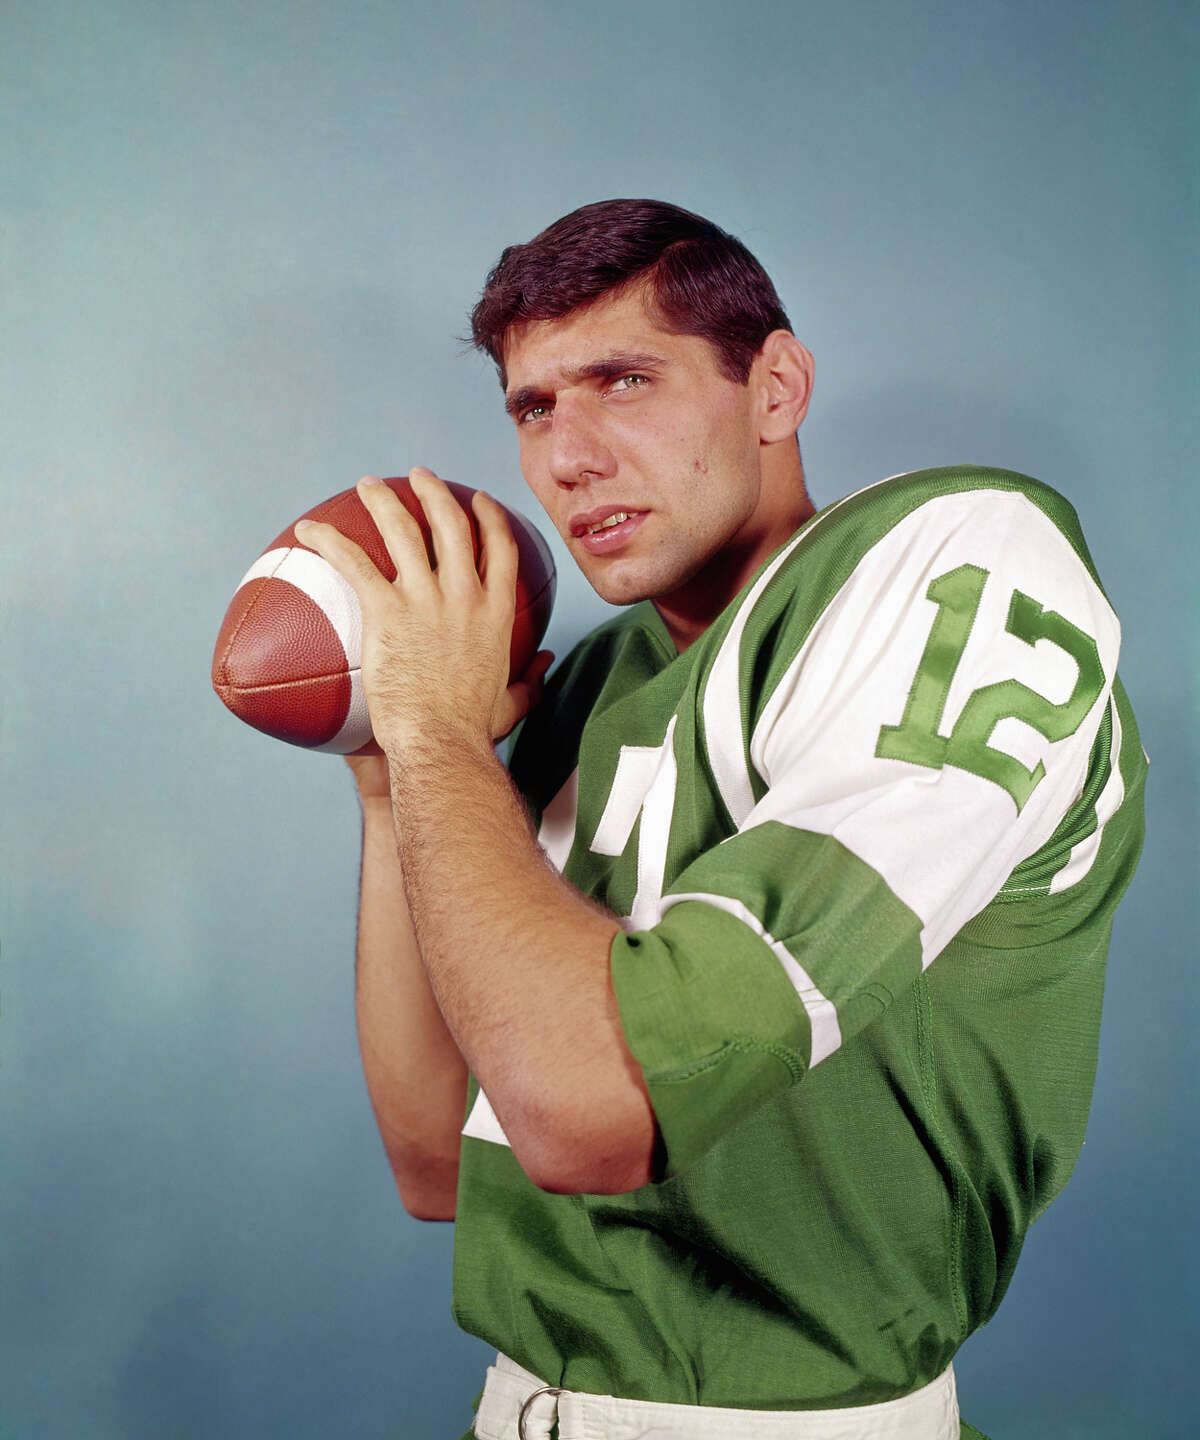 Broadway Joe hits the big seven-oh May 31. Here's a short look at his career, beginning with this photo from training camp in Peekskill, NY in 1965 — his rookie year with the Jets.